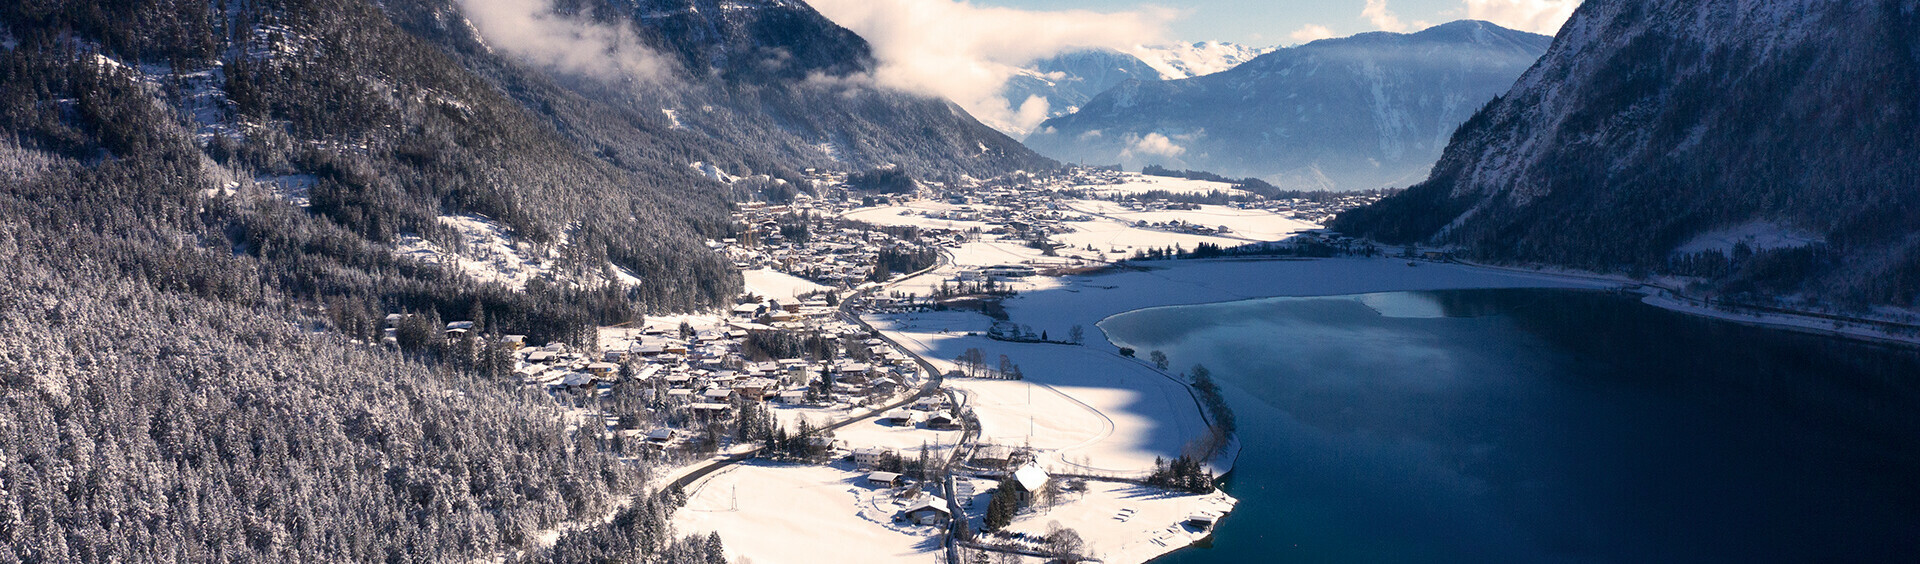 Fresh snow transforms Lake Achensee and its surrounding villages into a winter wonderland.